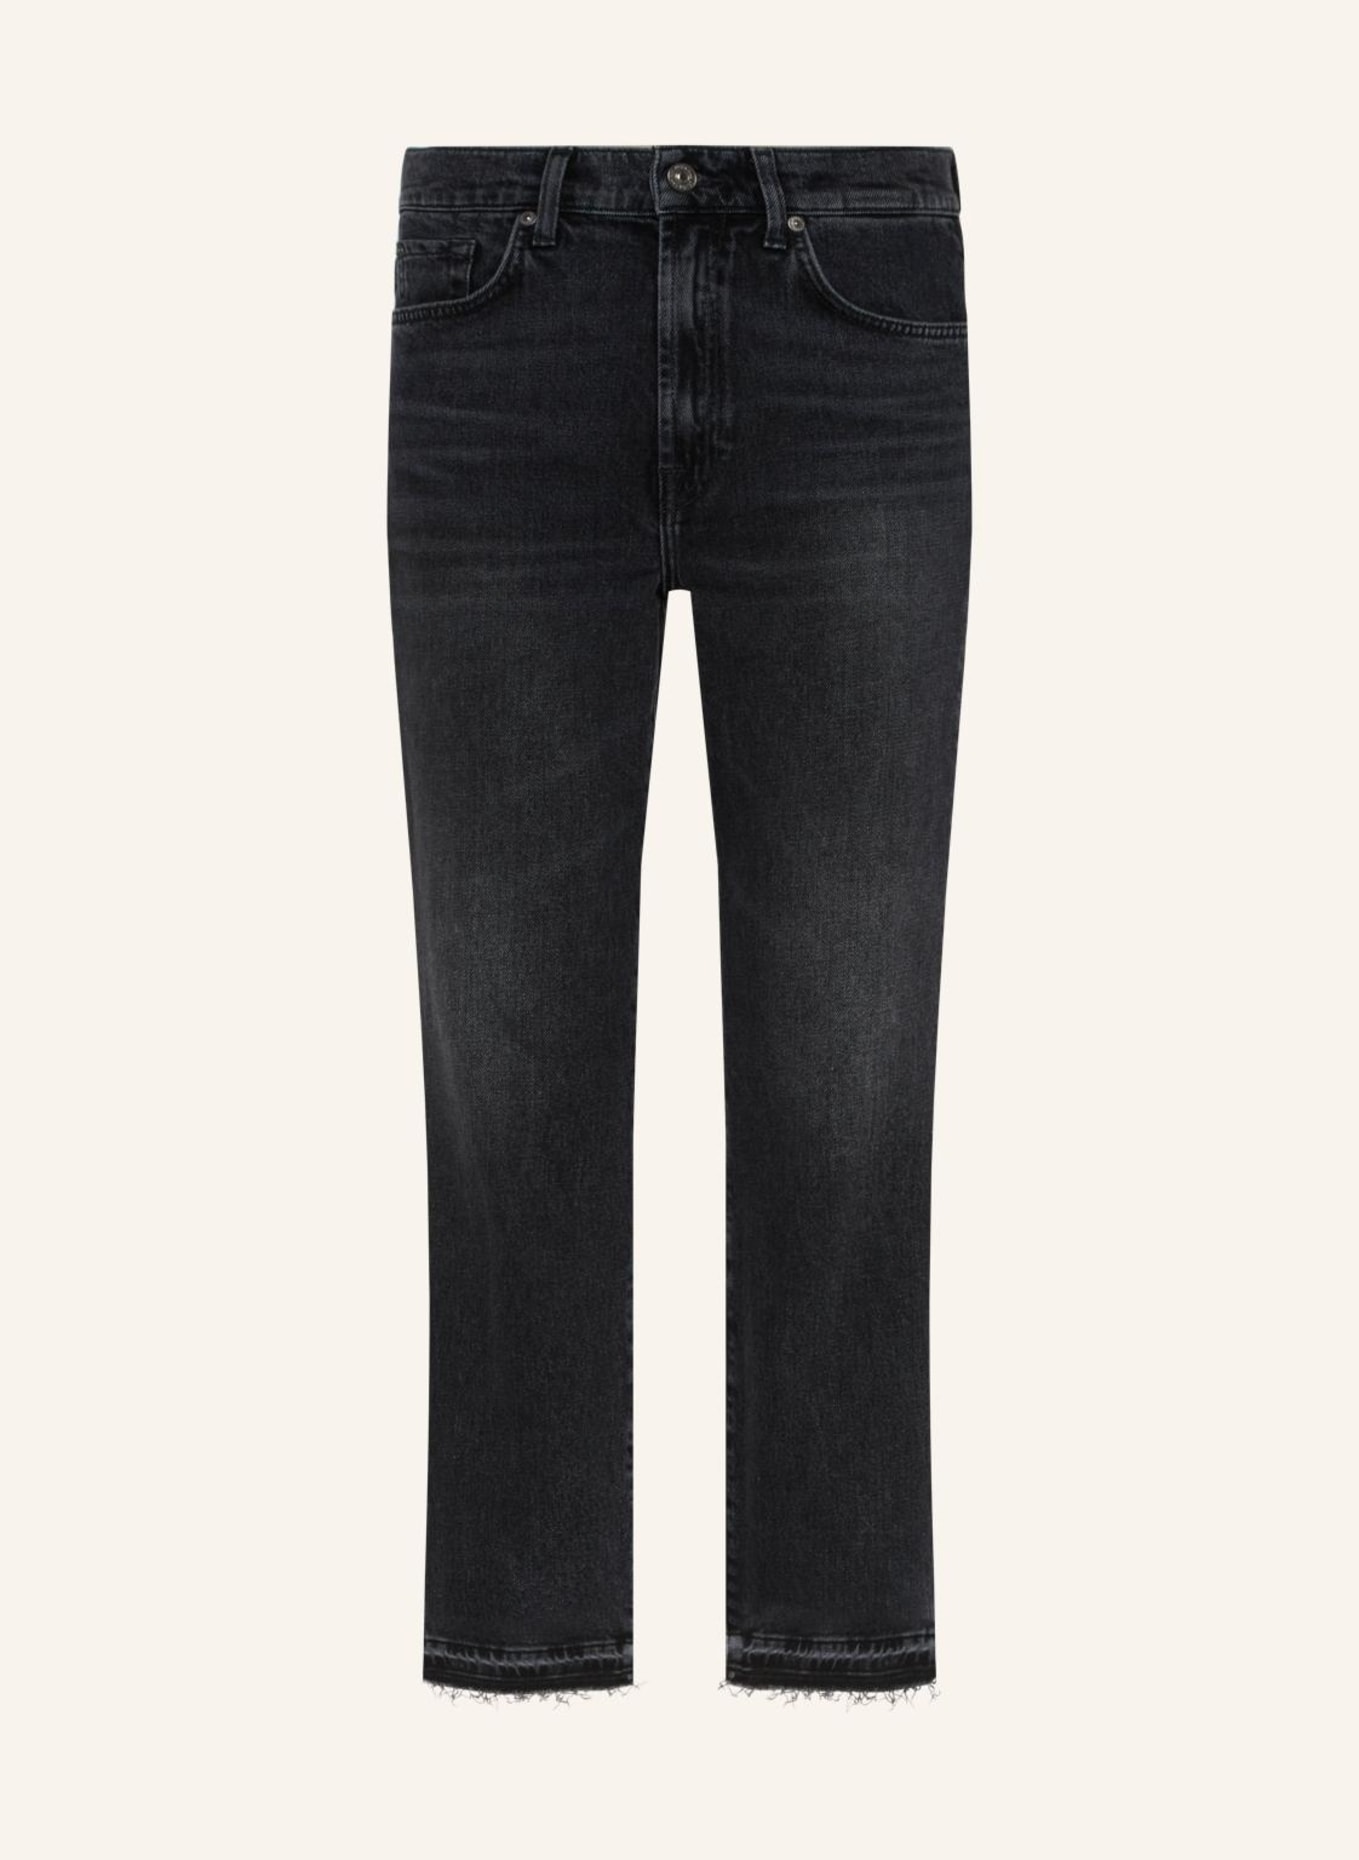 7 for all mankind Jeans LOGAN STOVEPIPE Straight Fit, Farbe: SCHWARZ (Bild 1)